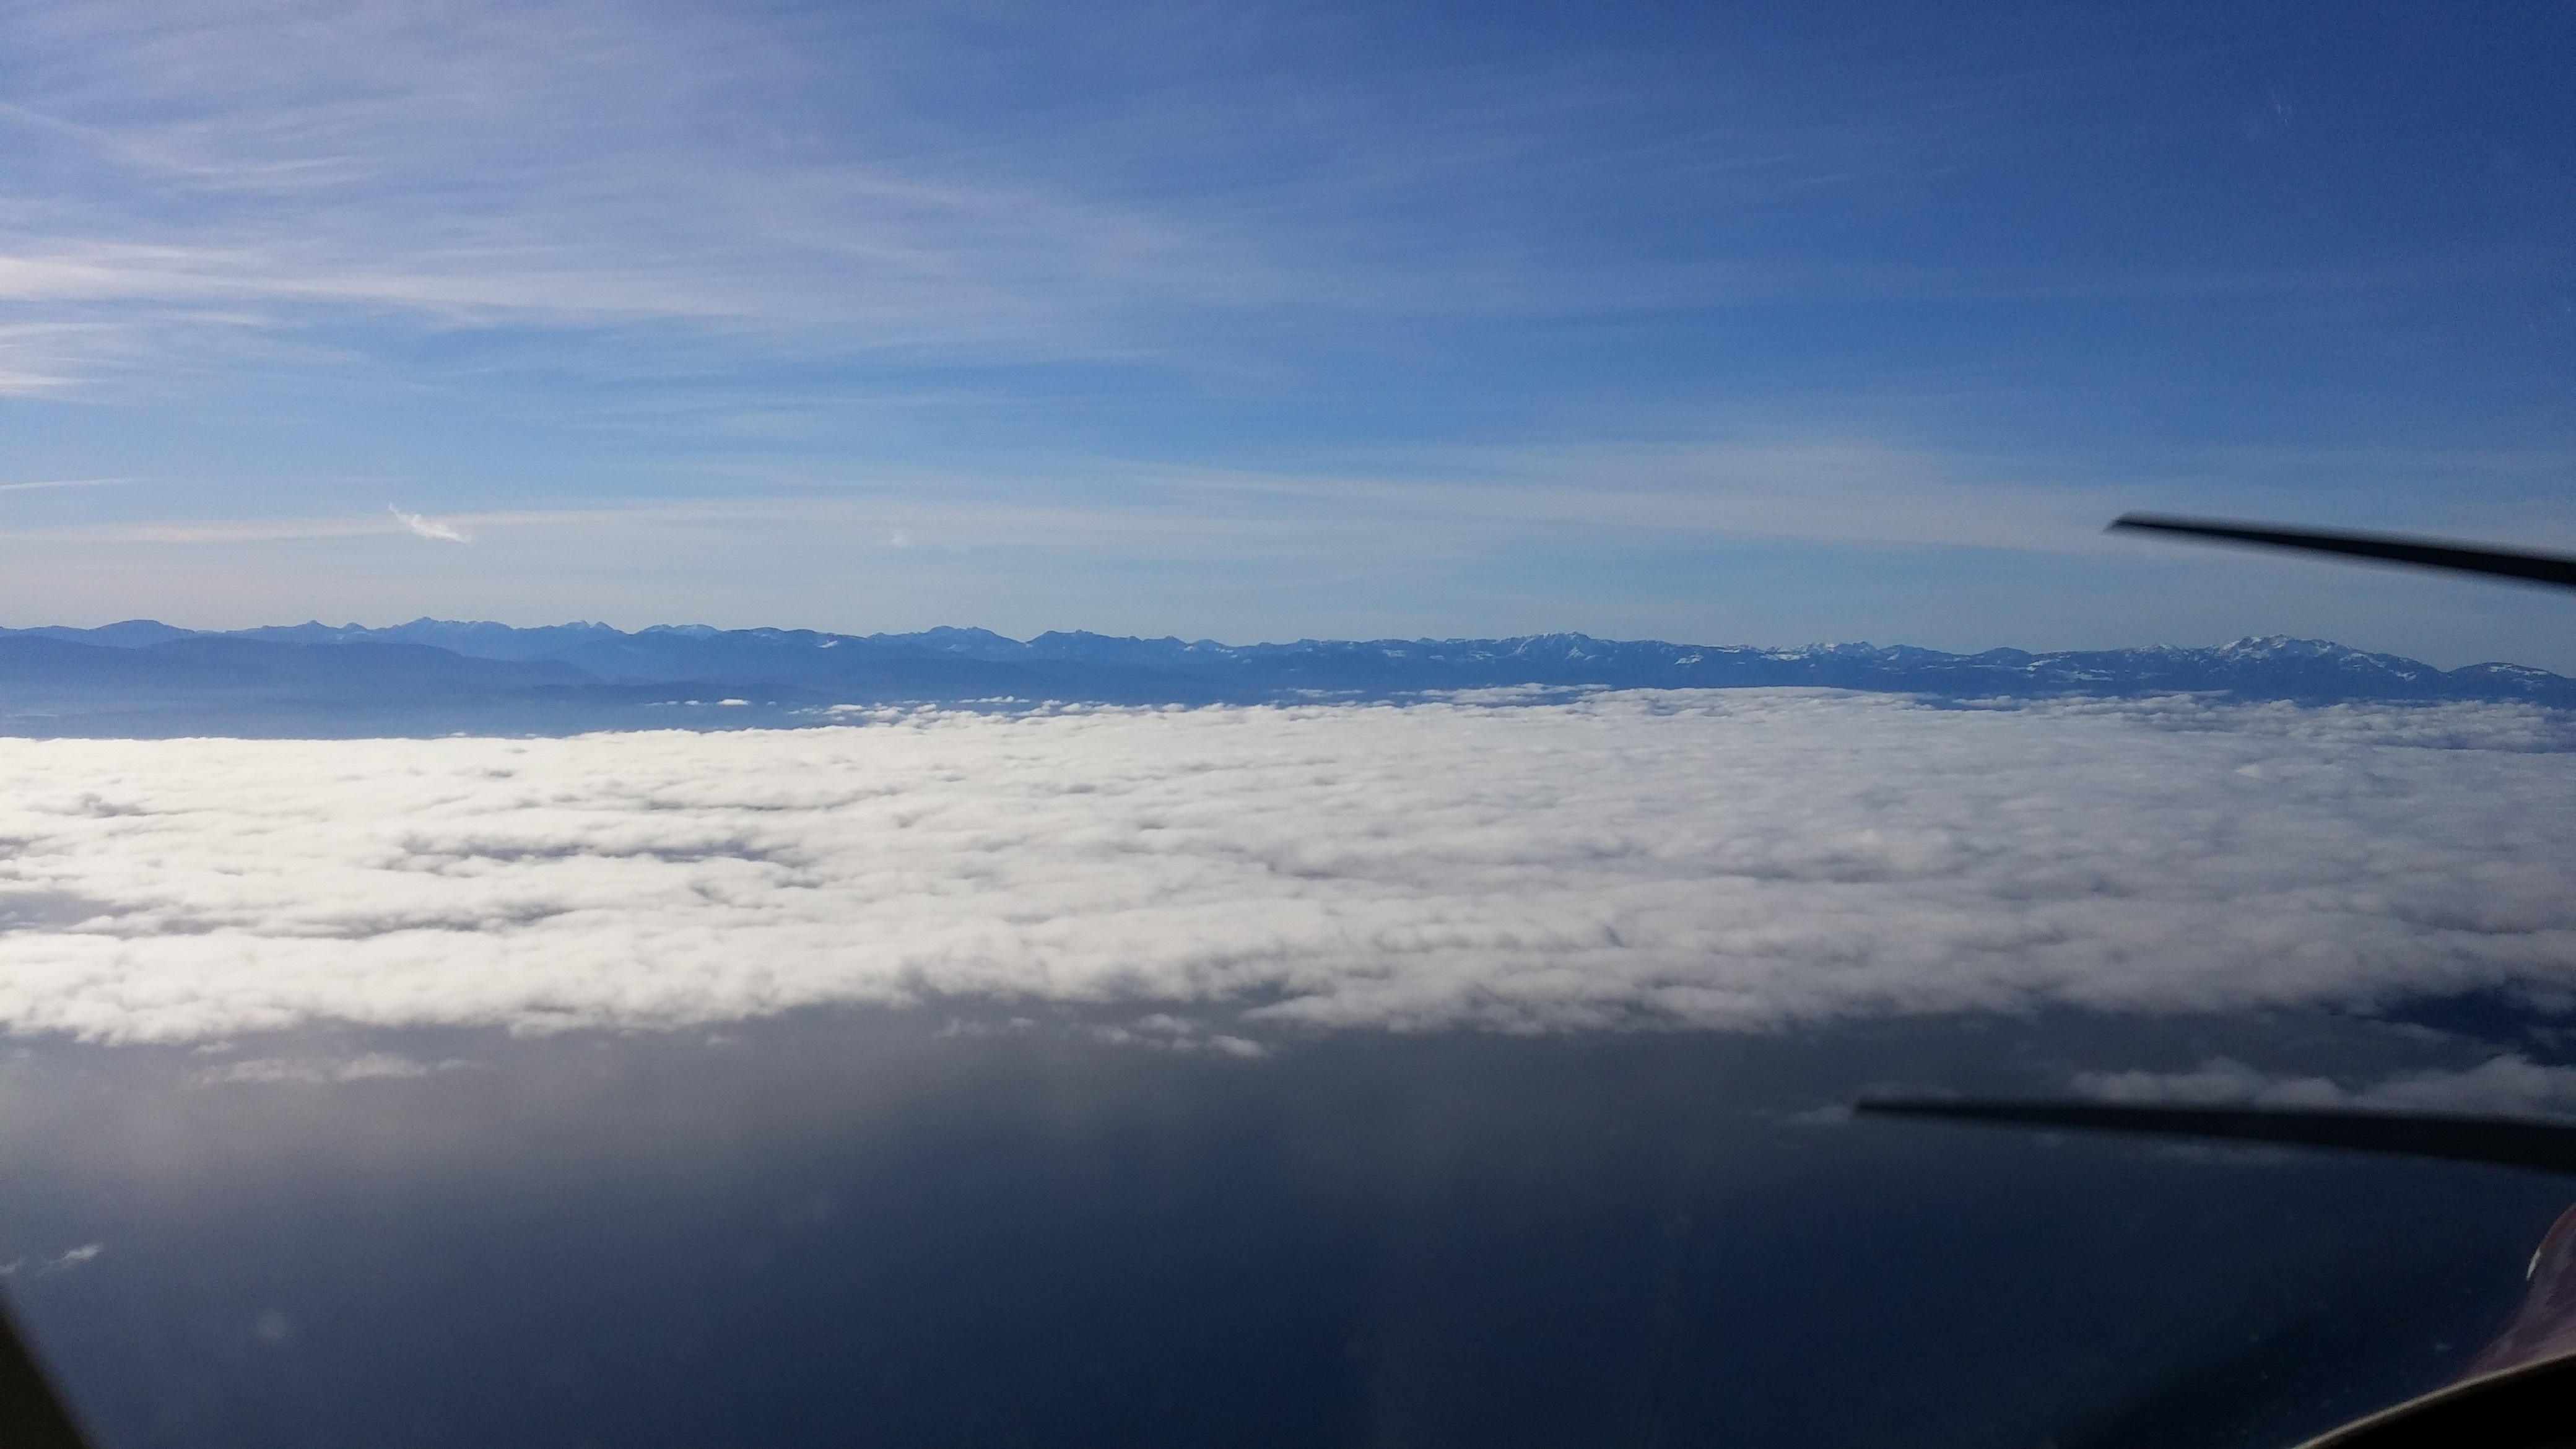 Cloud cover between Vancouver Island and the mainland